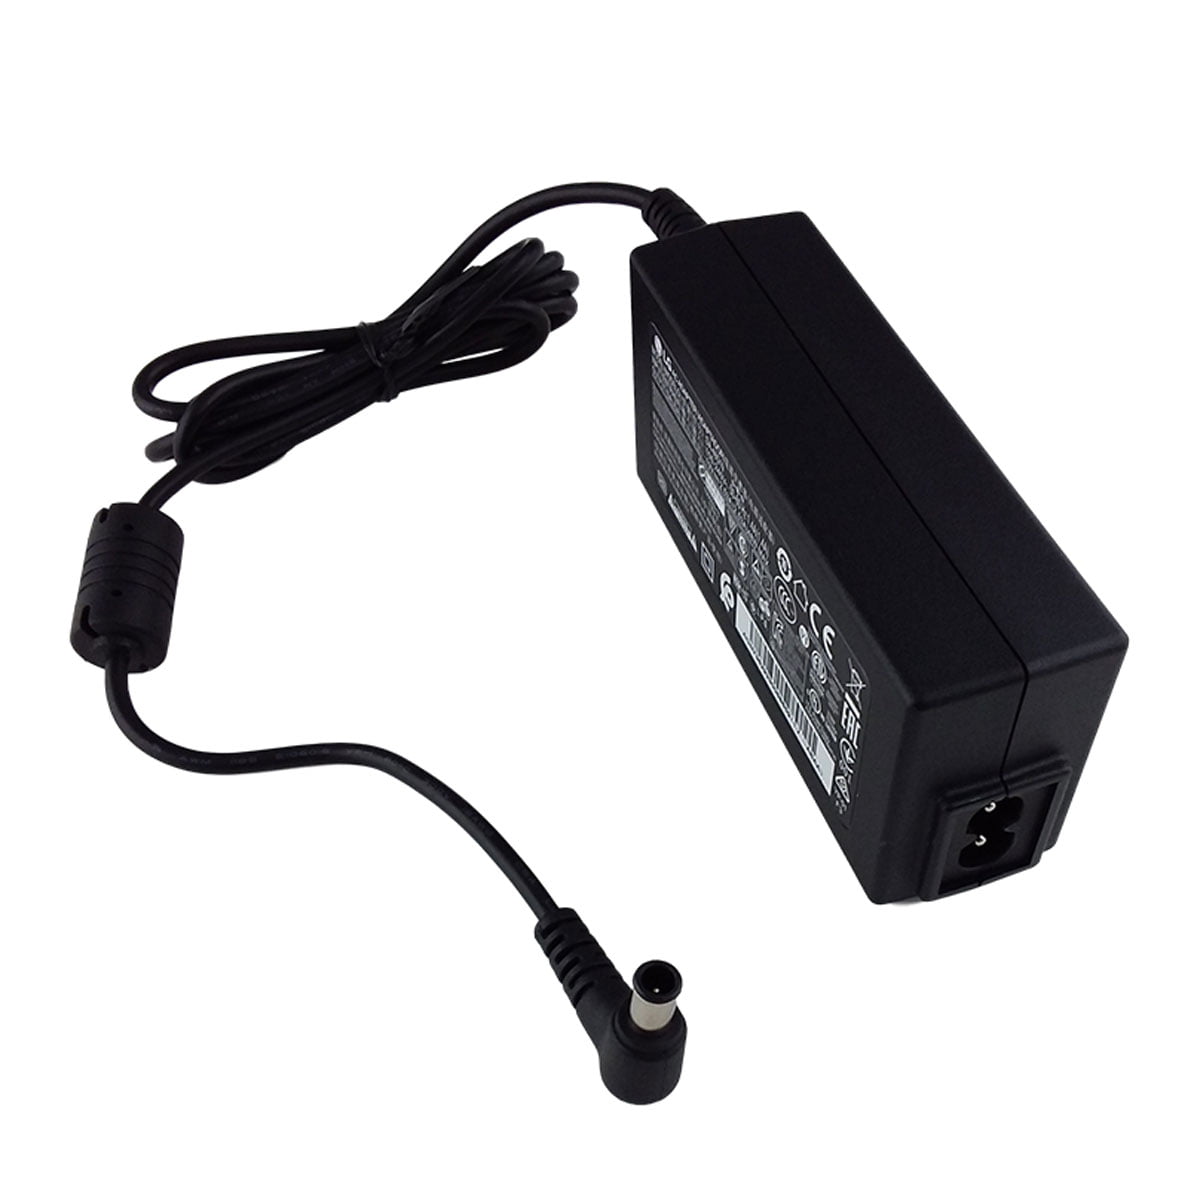 Accessory USA AC DC Adapter for LG Electronics DA-48A18 Audio Video Apparatus Switching Power Supply Cord